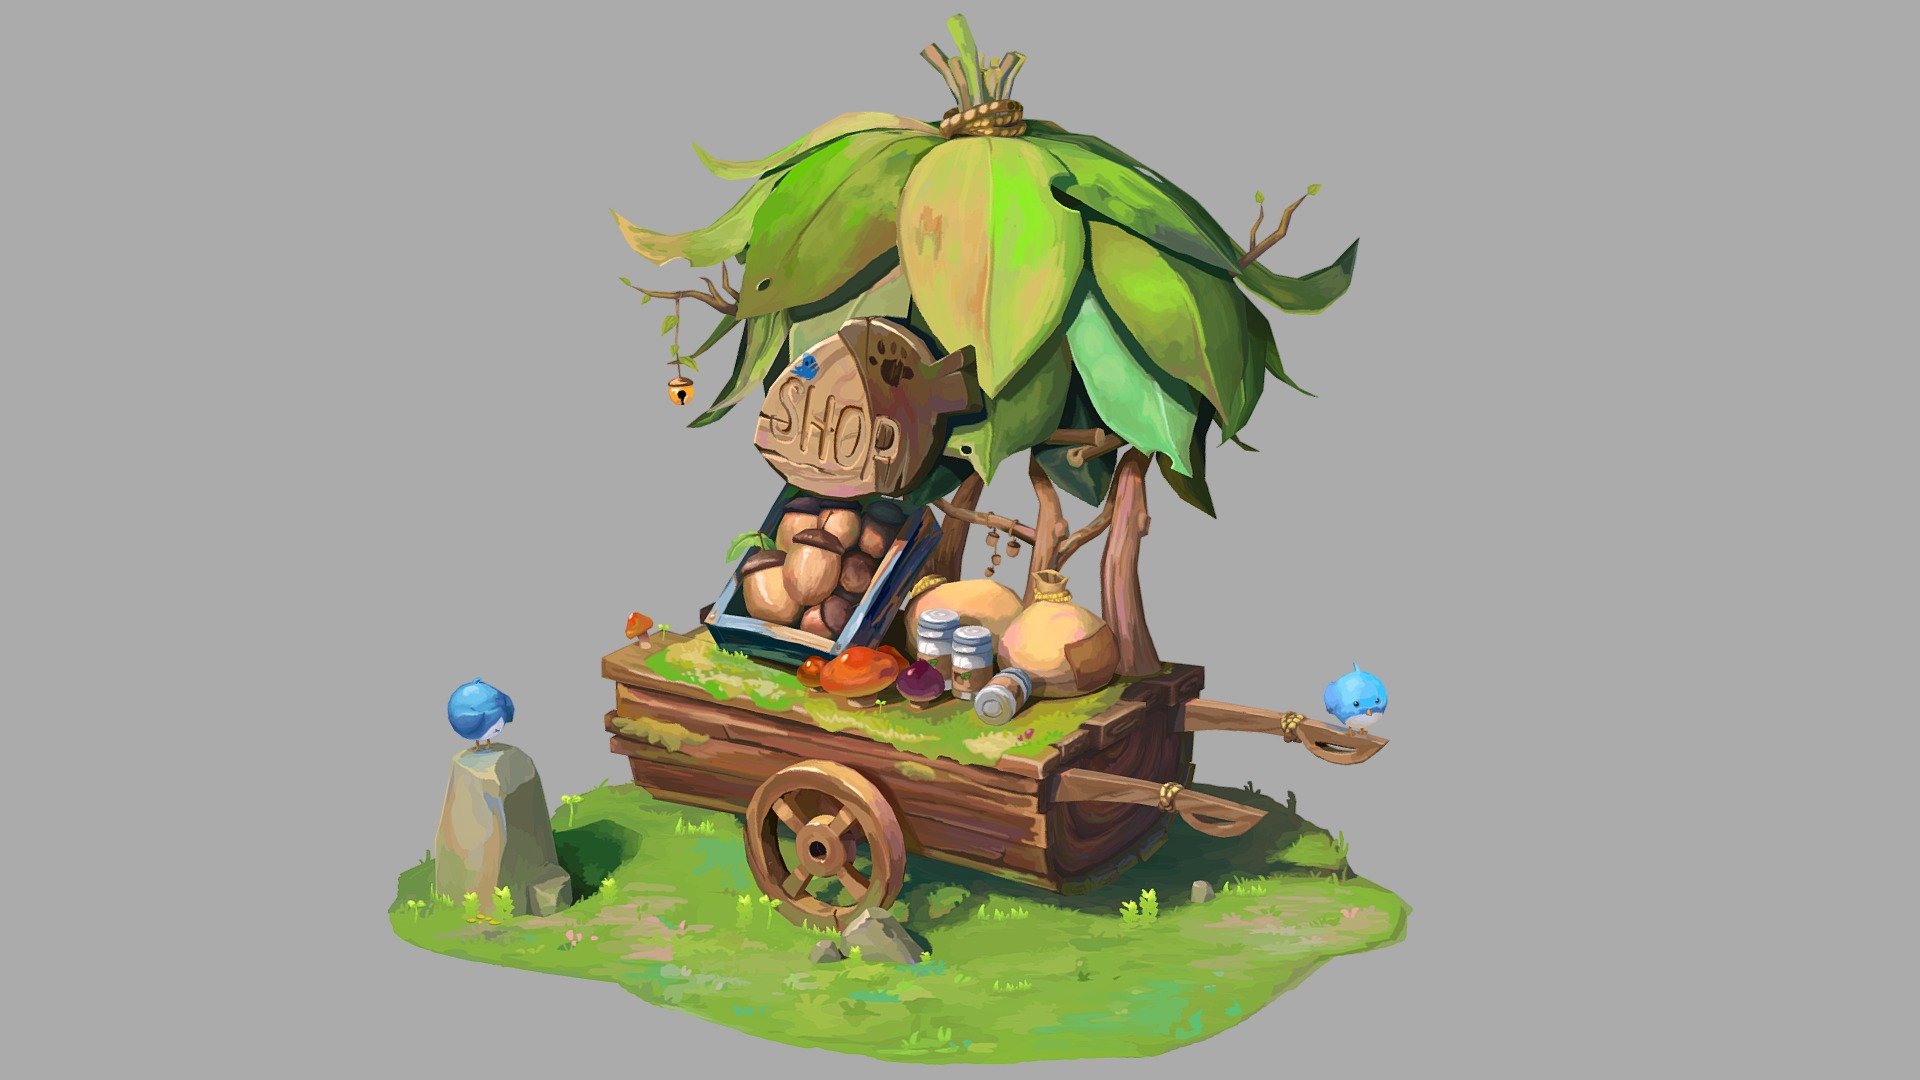 Just a lil' acorn shop, unlit and handpainted in Substance Painter and modelled in 3ds Max 🌿💕

Based off this gorgeous concept:
https://www.artstation.com/artwork/v2v36O - Acorn Shop - 3D model by Jay Topham (@sophee.jay) 3d model